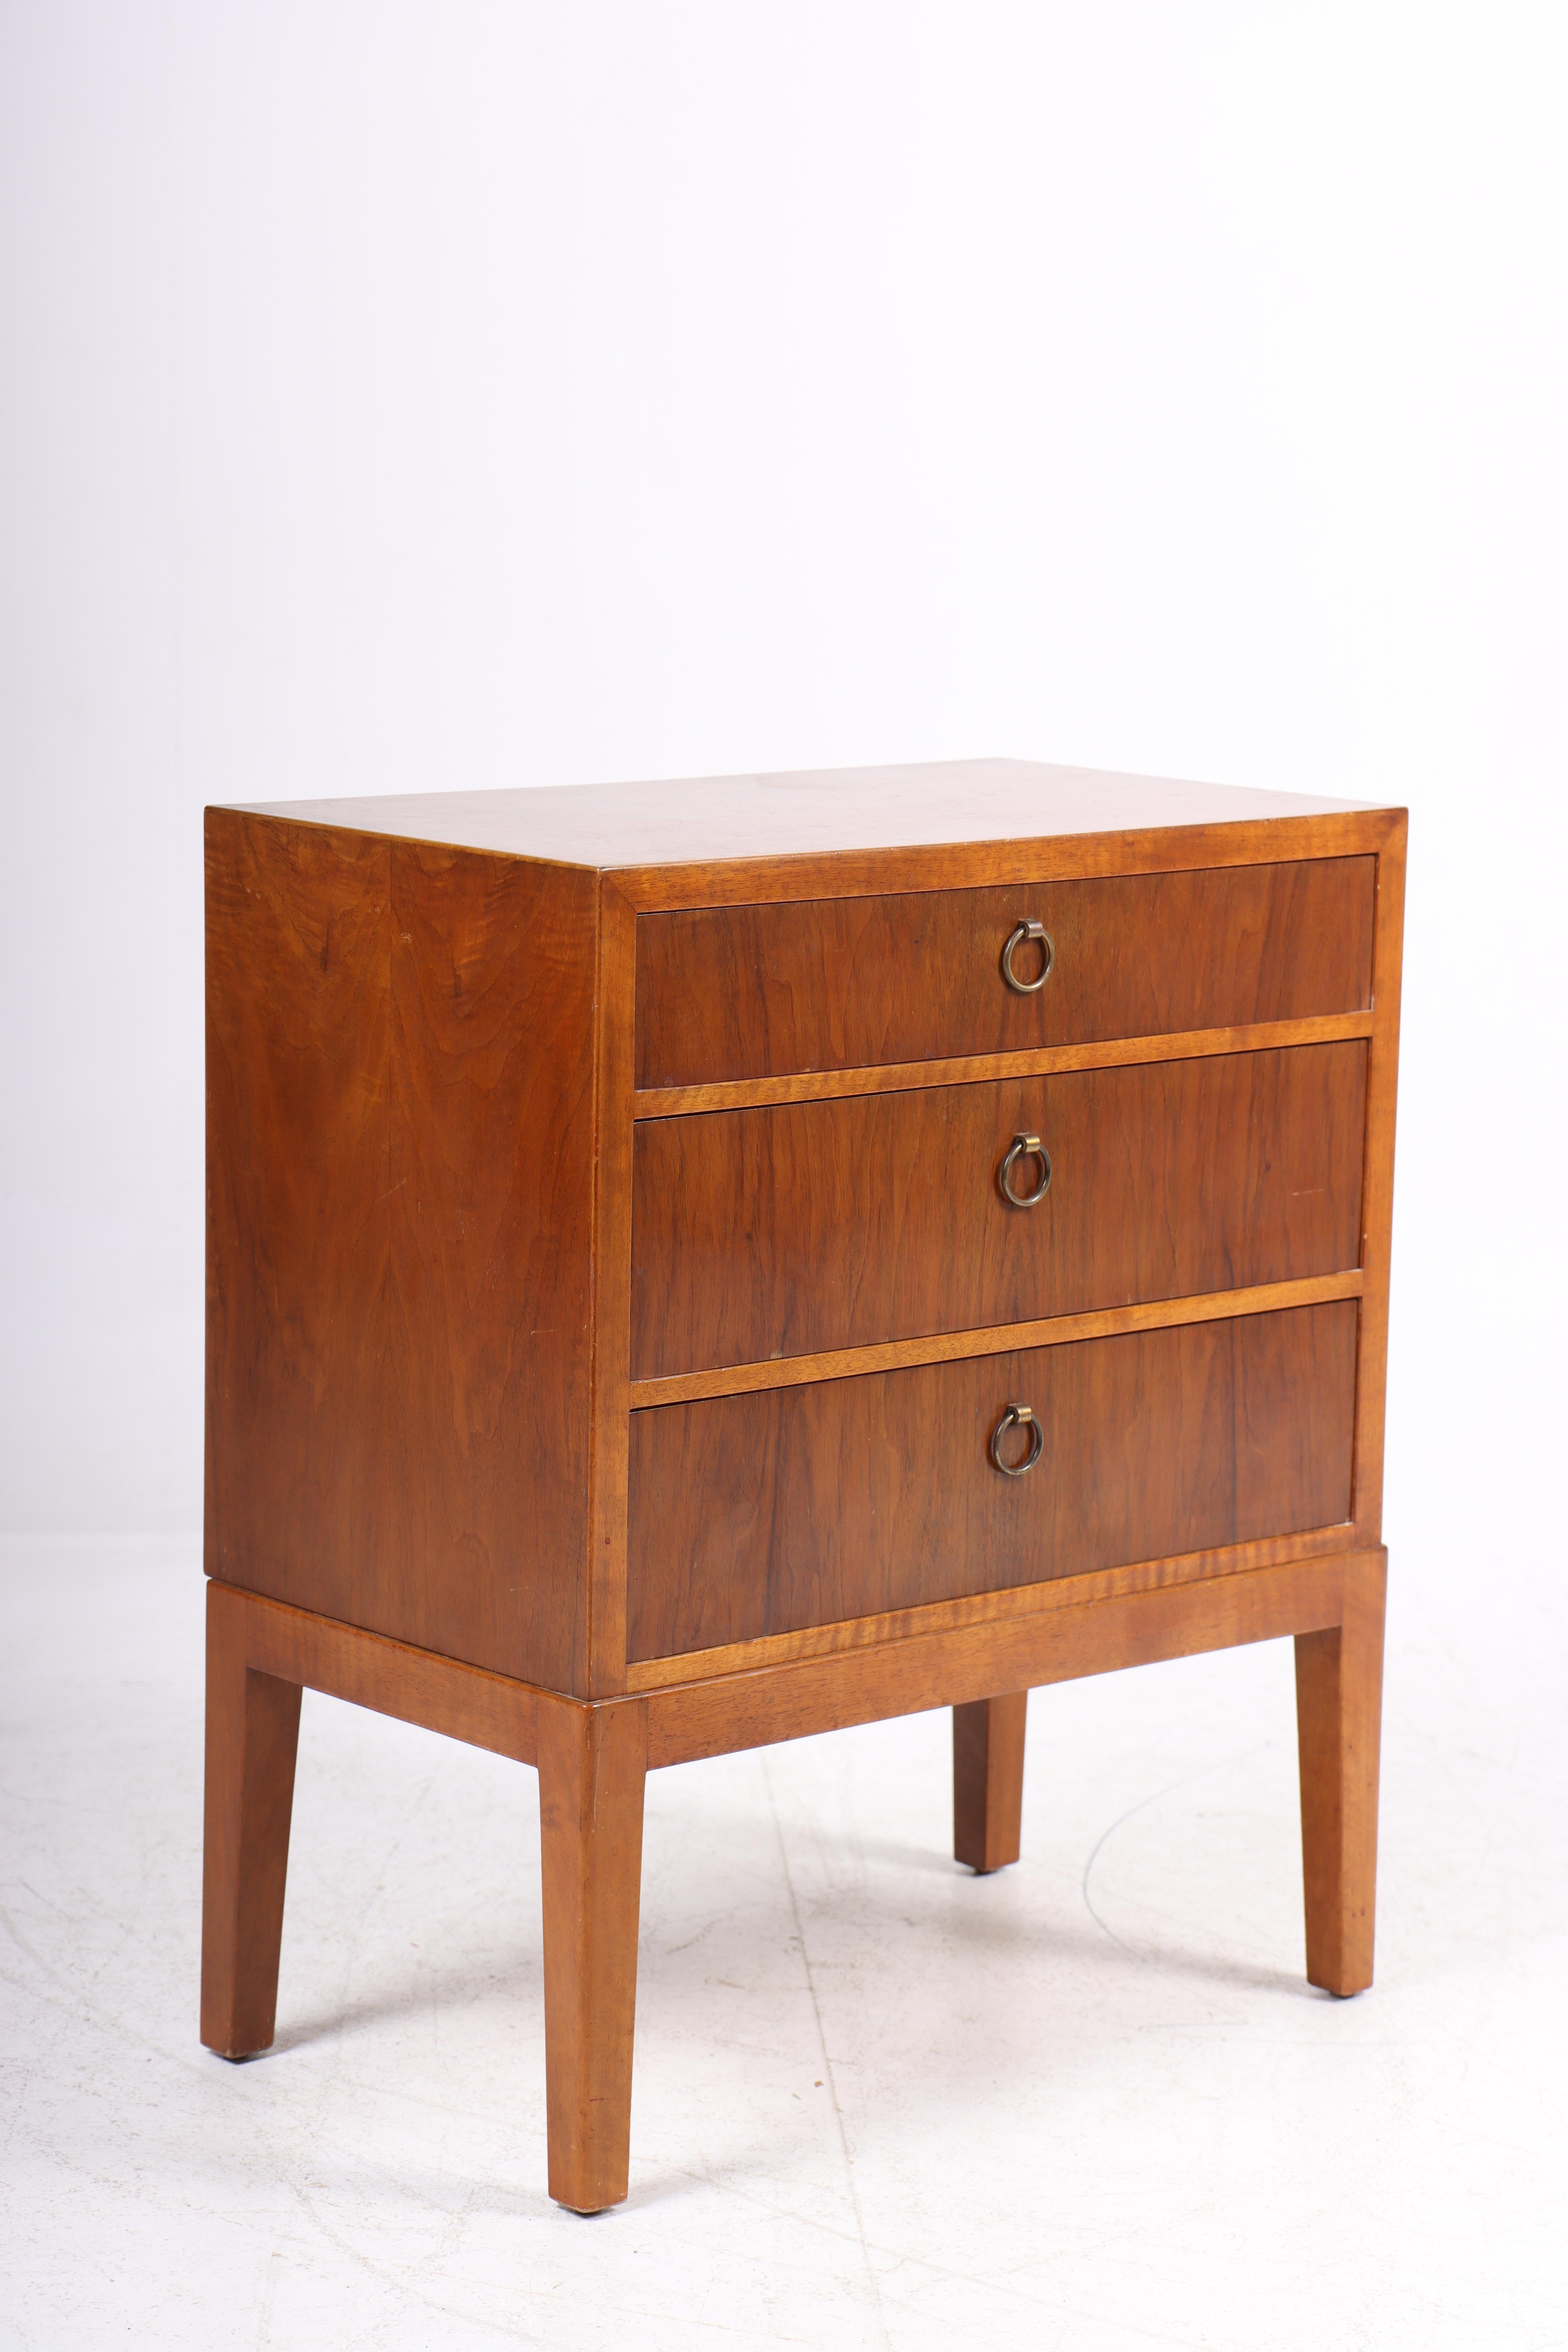 Rare chest of drawers in walnut. Designed and made by Thorald Madsen. Great condition.